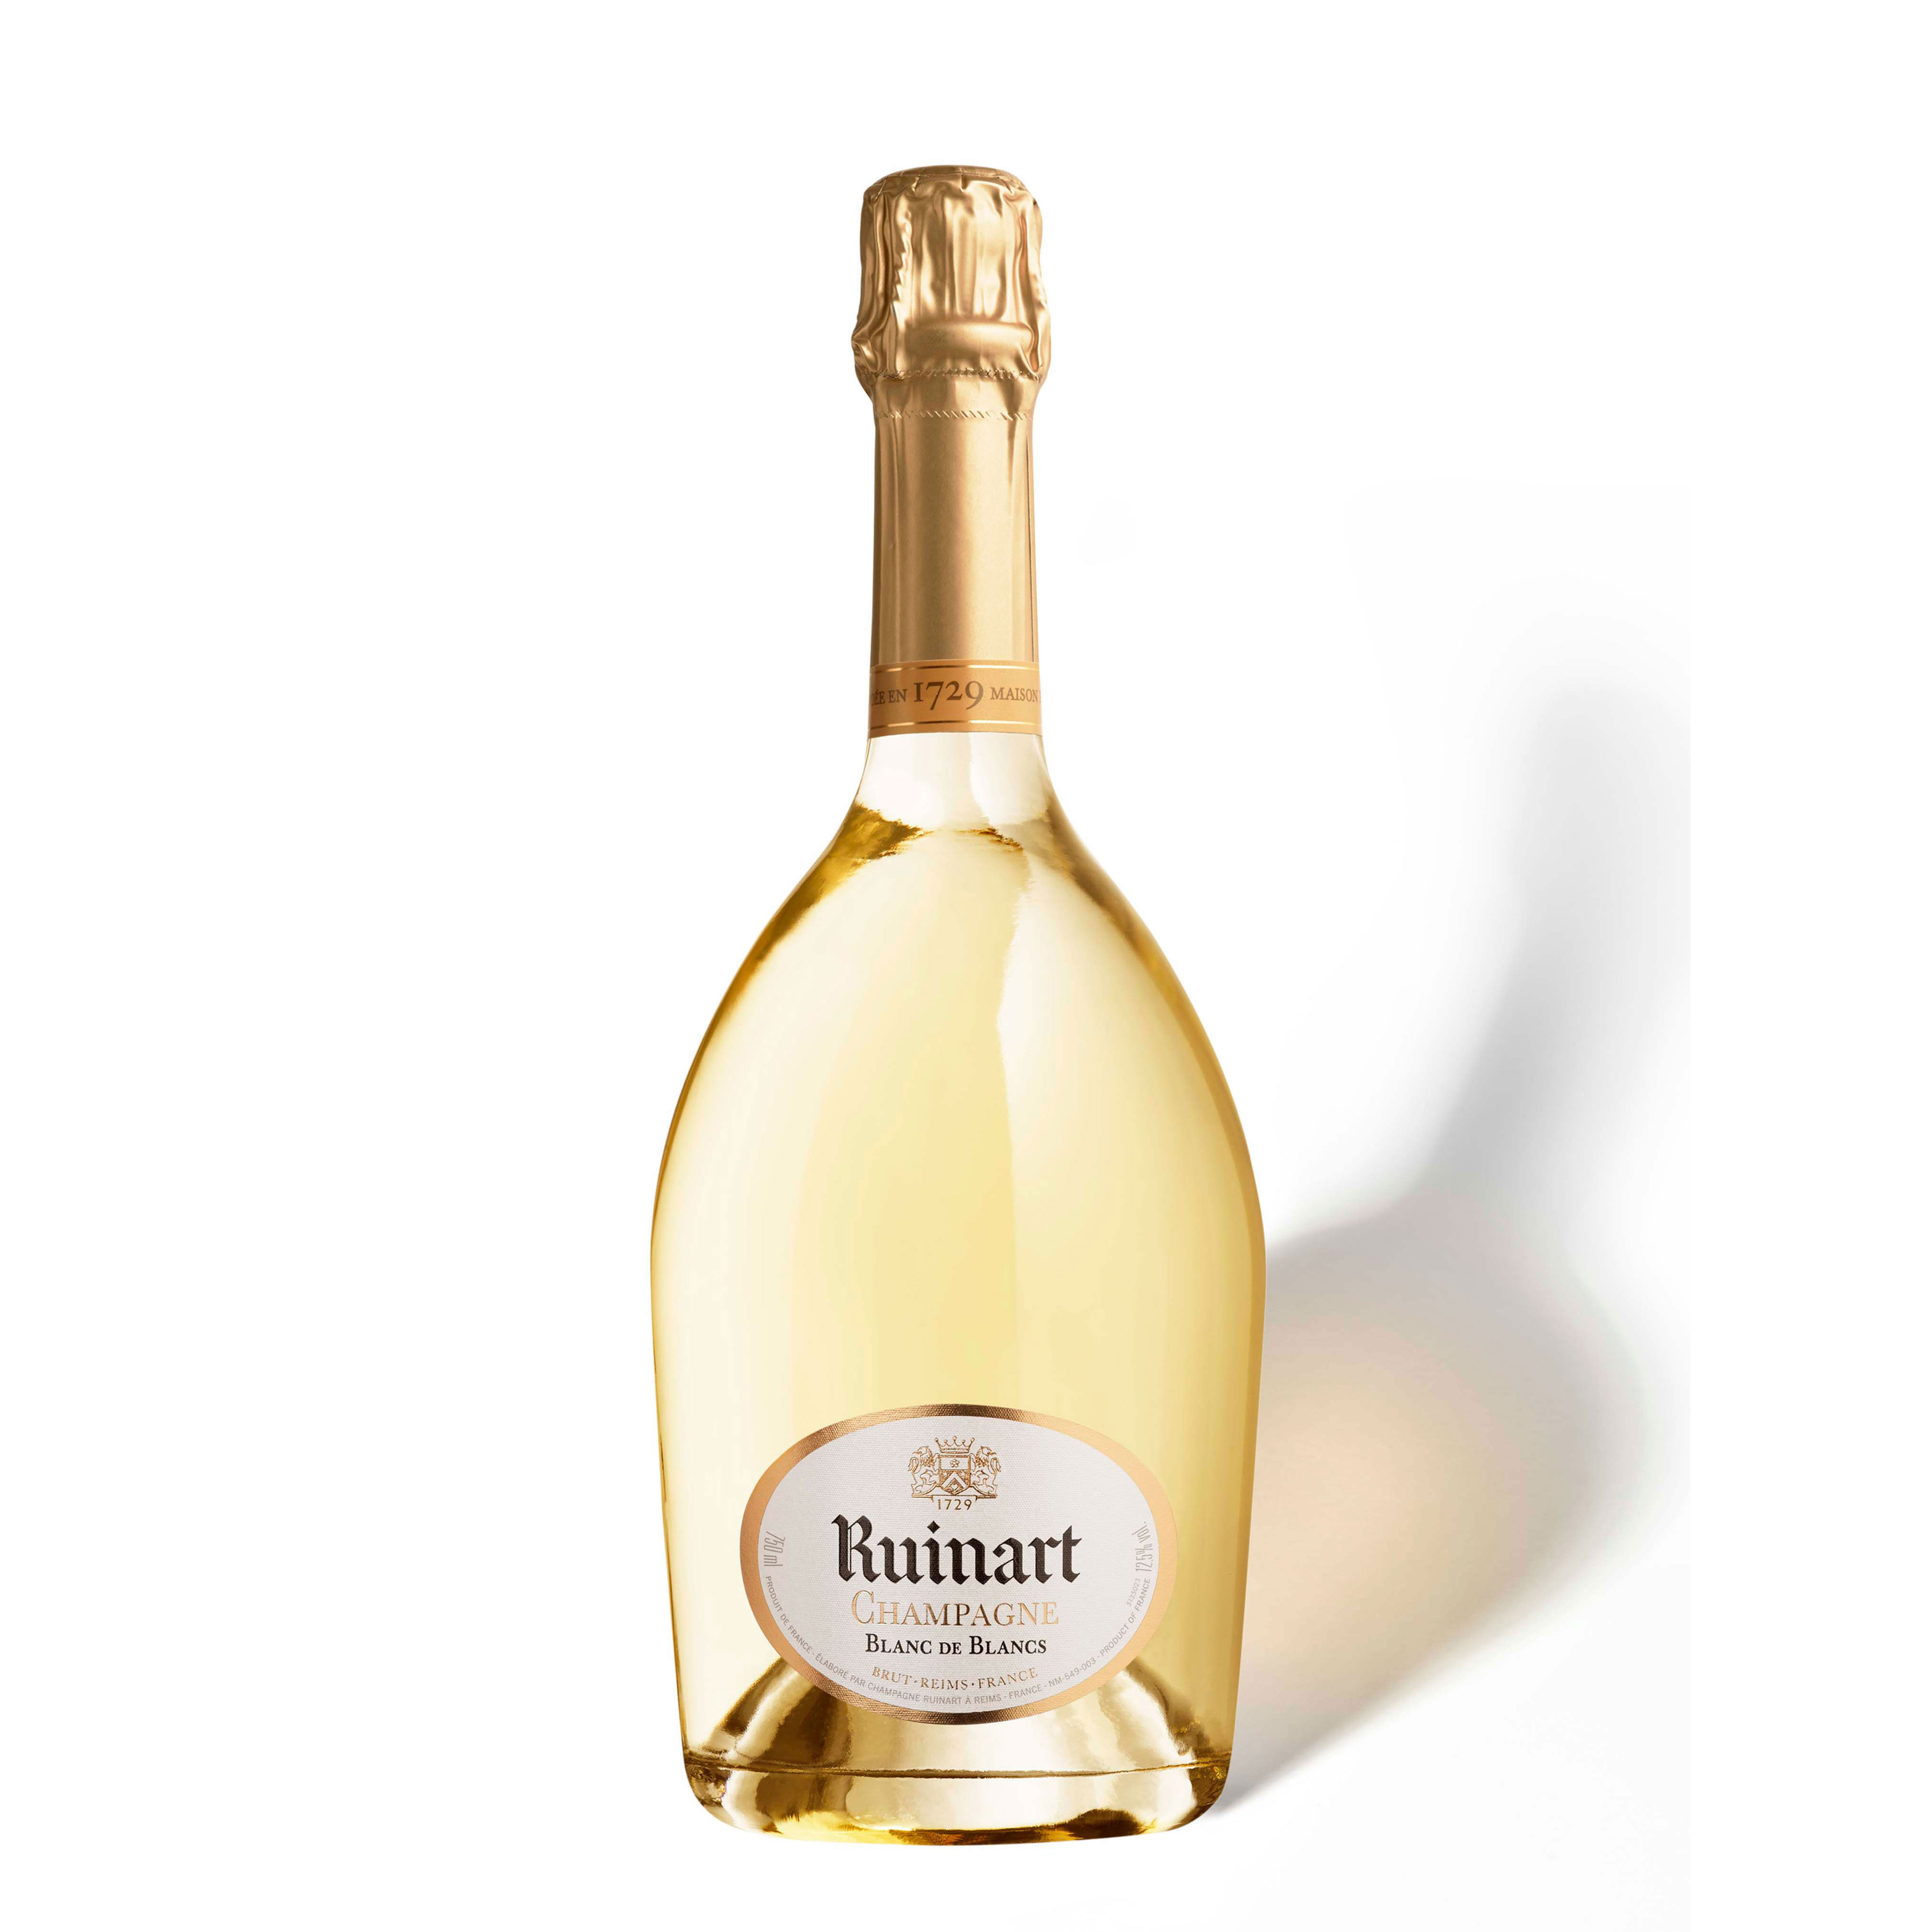 Ruinart Blanc de Blanc Champagne 75cl Great Price and Home Delivery